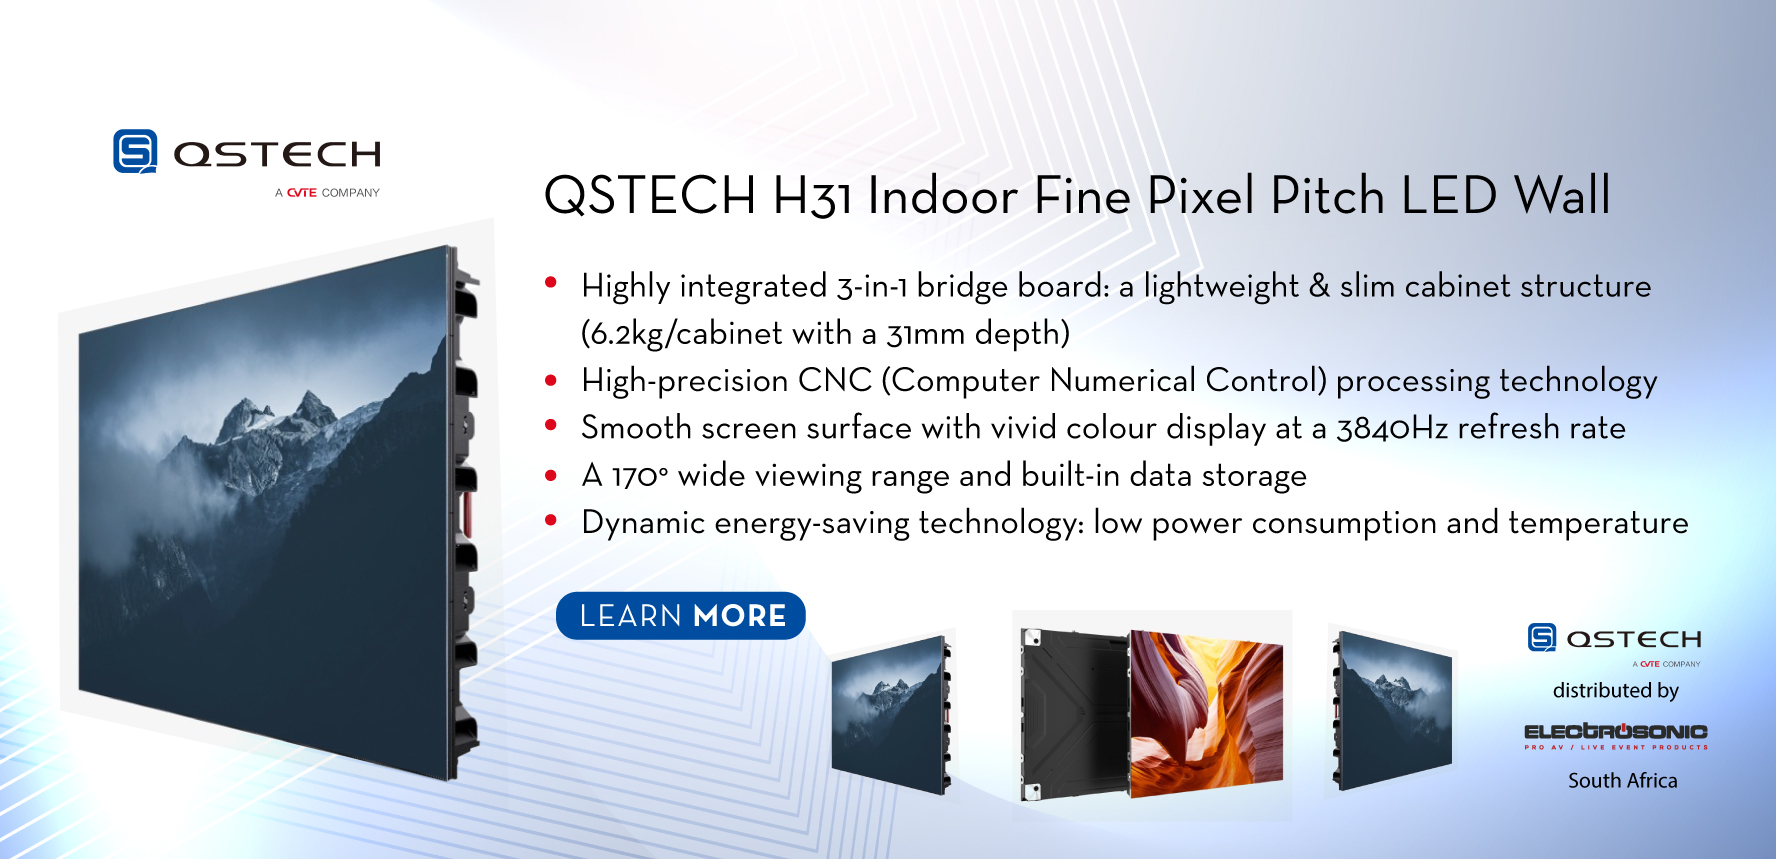 QSTECH-H31-Indoor-Fine-Pixel-Pitch-LED-Wall